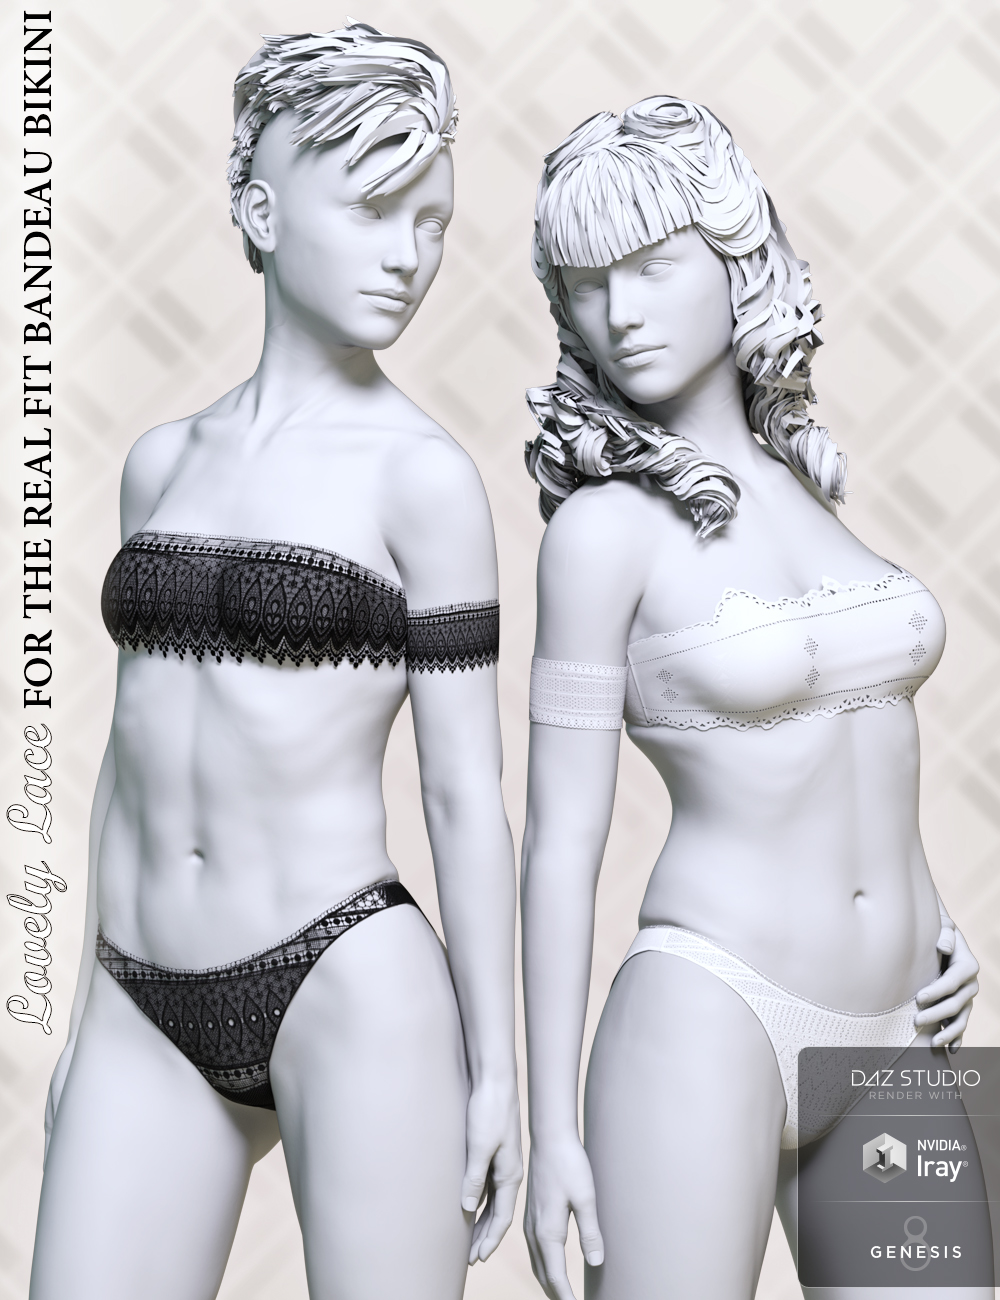 Lovely Lace for the Real Fit Bandeau Bikini by: ForbiddenWhispers, 3D Models by Daz 3D